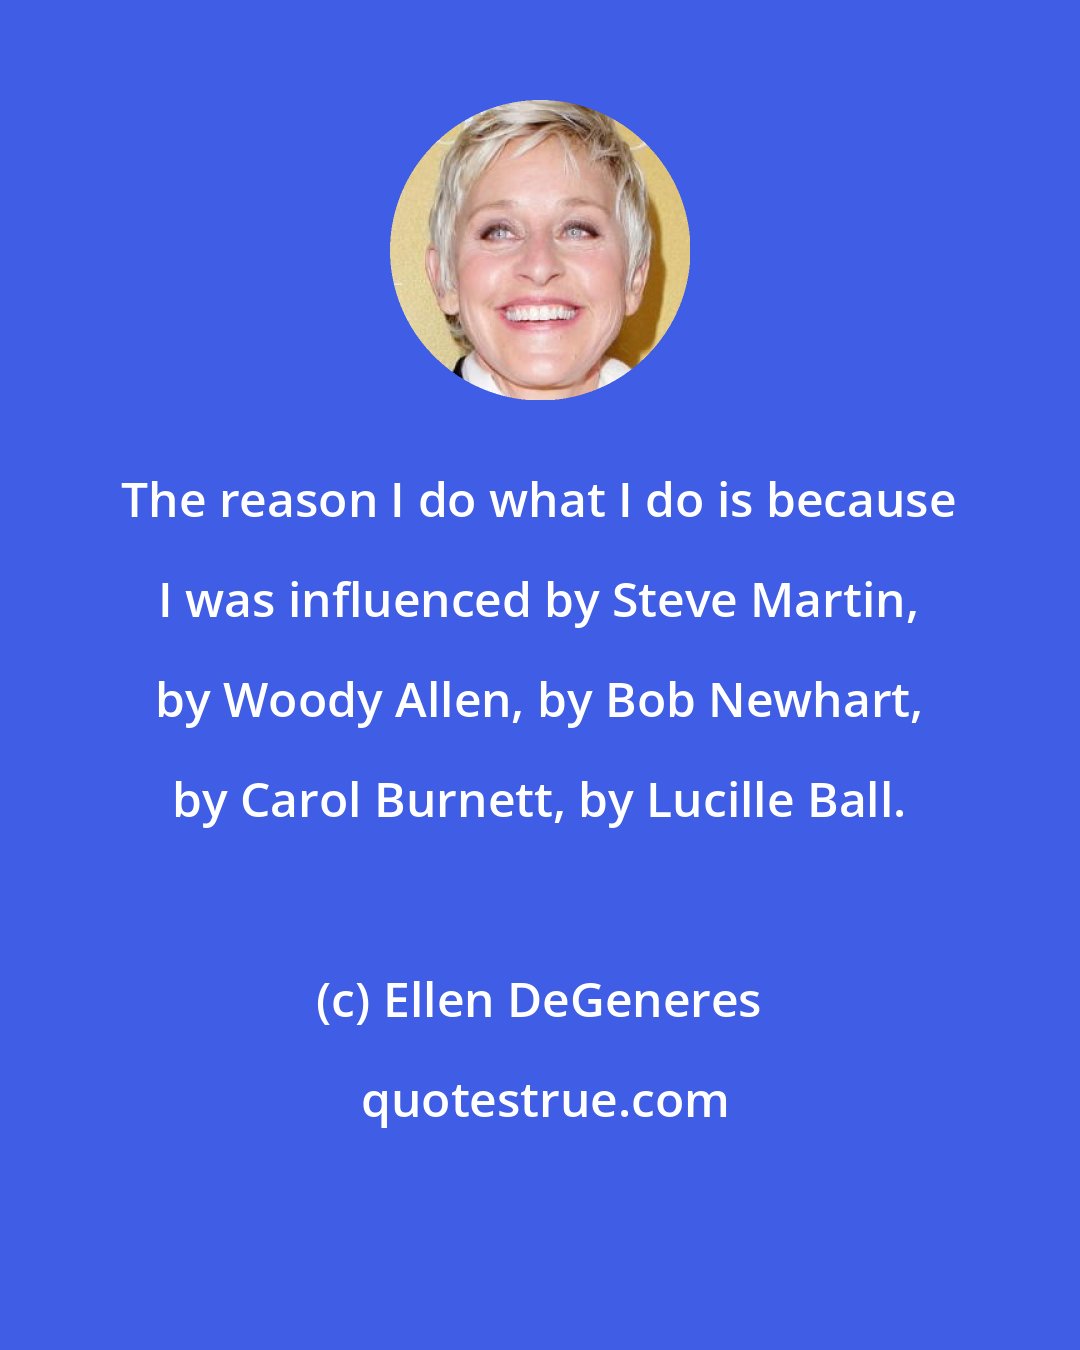 Ellen DeGeneres: The reason I do what I do is because I was influenced by Steve Martin, by Woody Allen, by Bob Newhart, by Carol Burnett, by Lucille Ball.